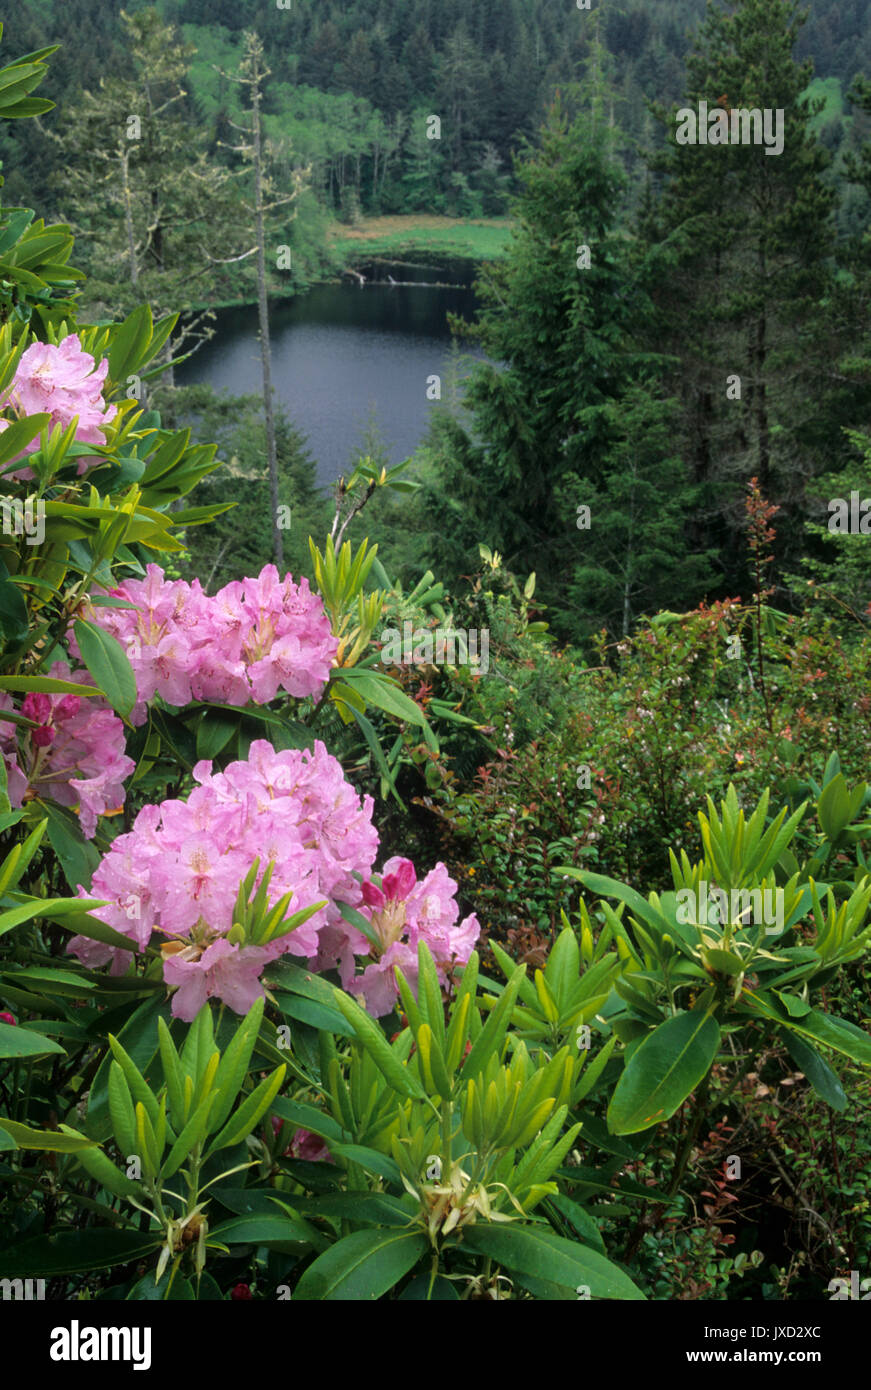 Elbow Lake with Pacific rhododendron (Rhododendron macrophyllum), Oregon Dunes National Recreation Area, Oregon Stock Photo